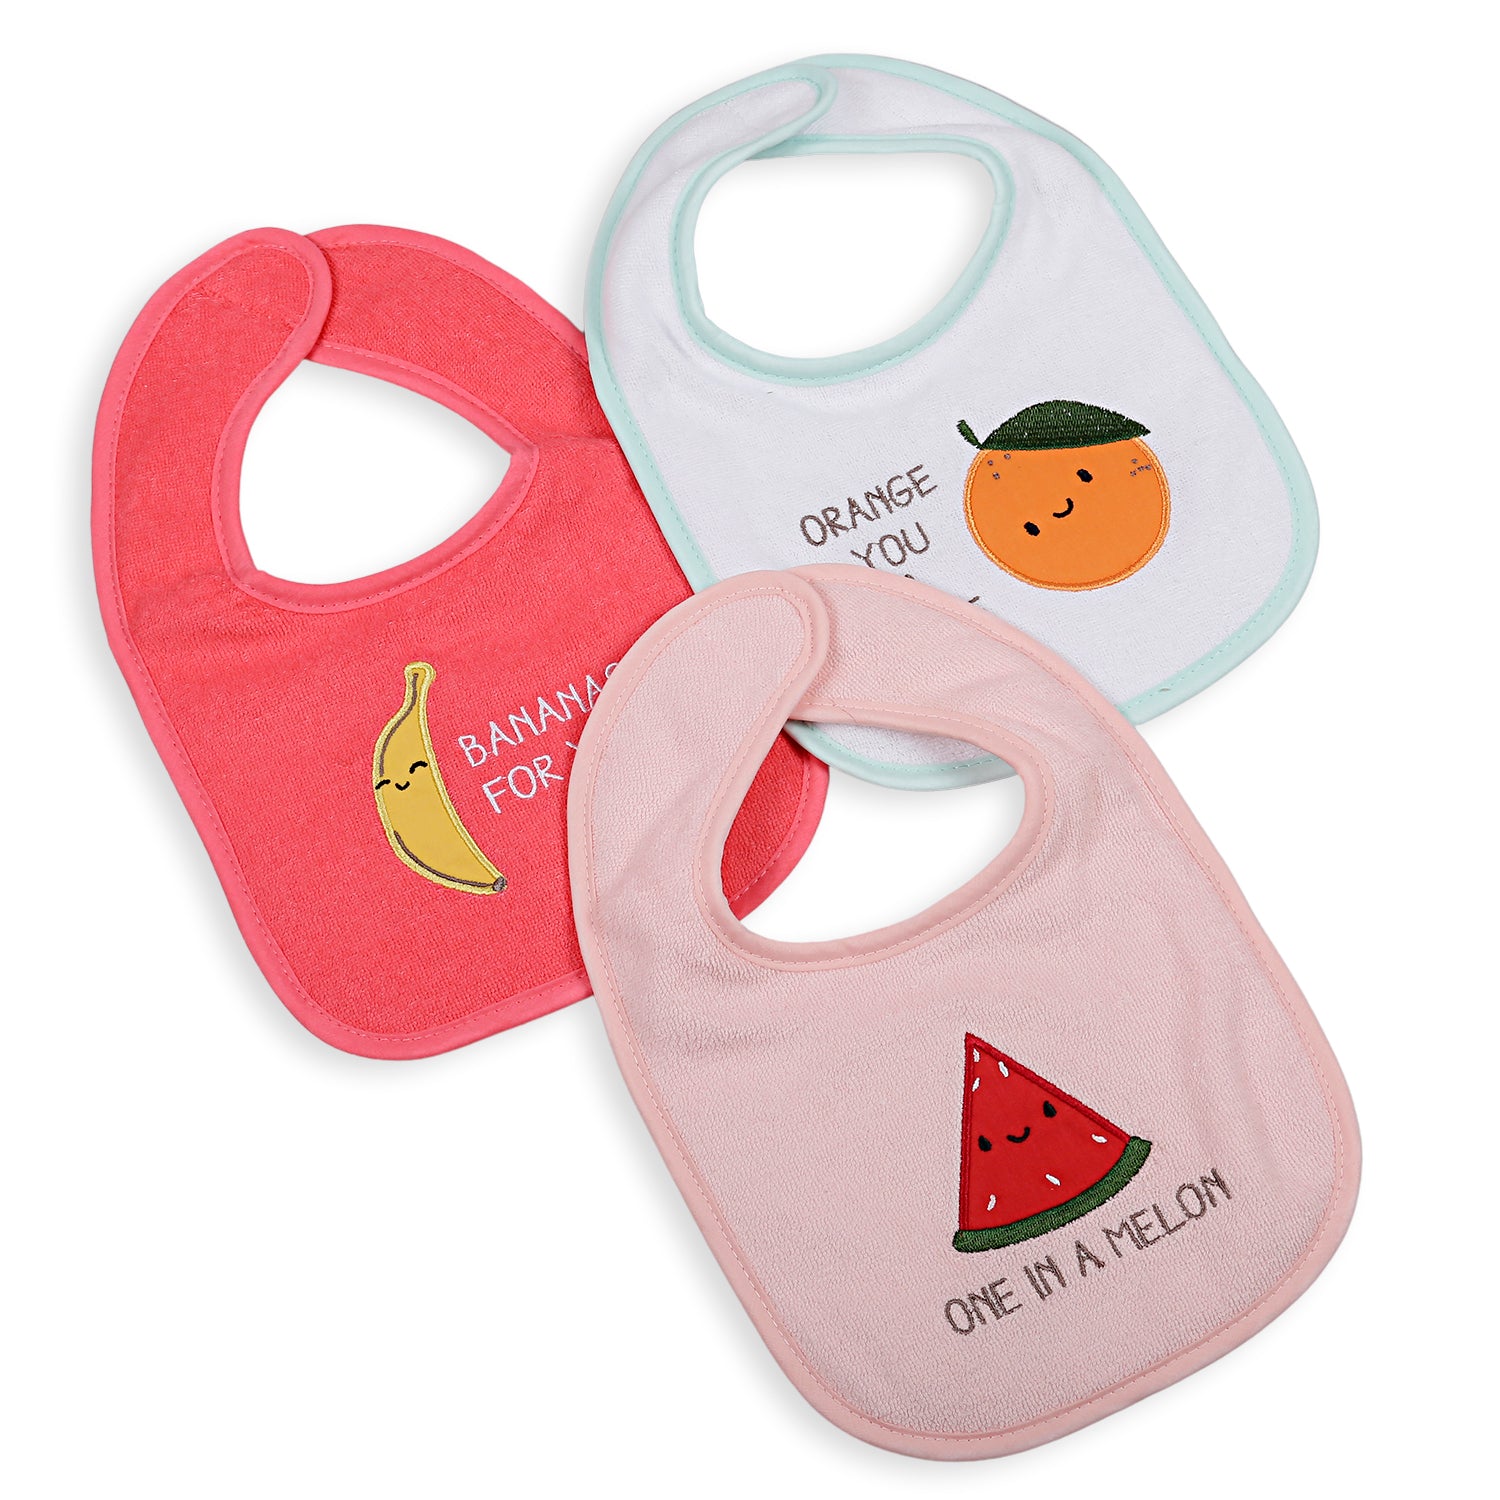 Feeding Bibs Pack Of 3 One In A Melon Multicolour - Baby Moo